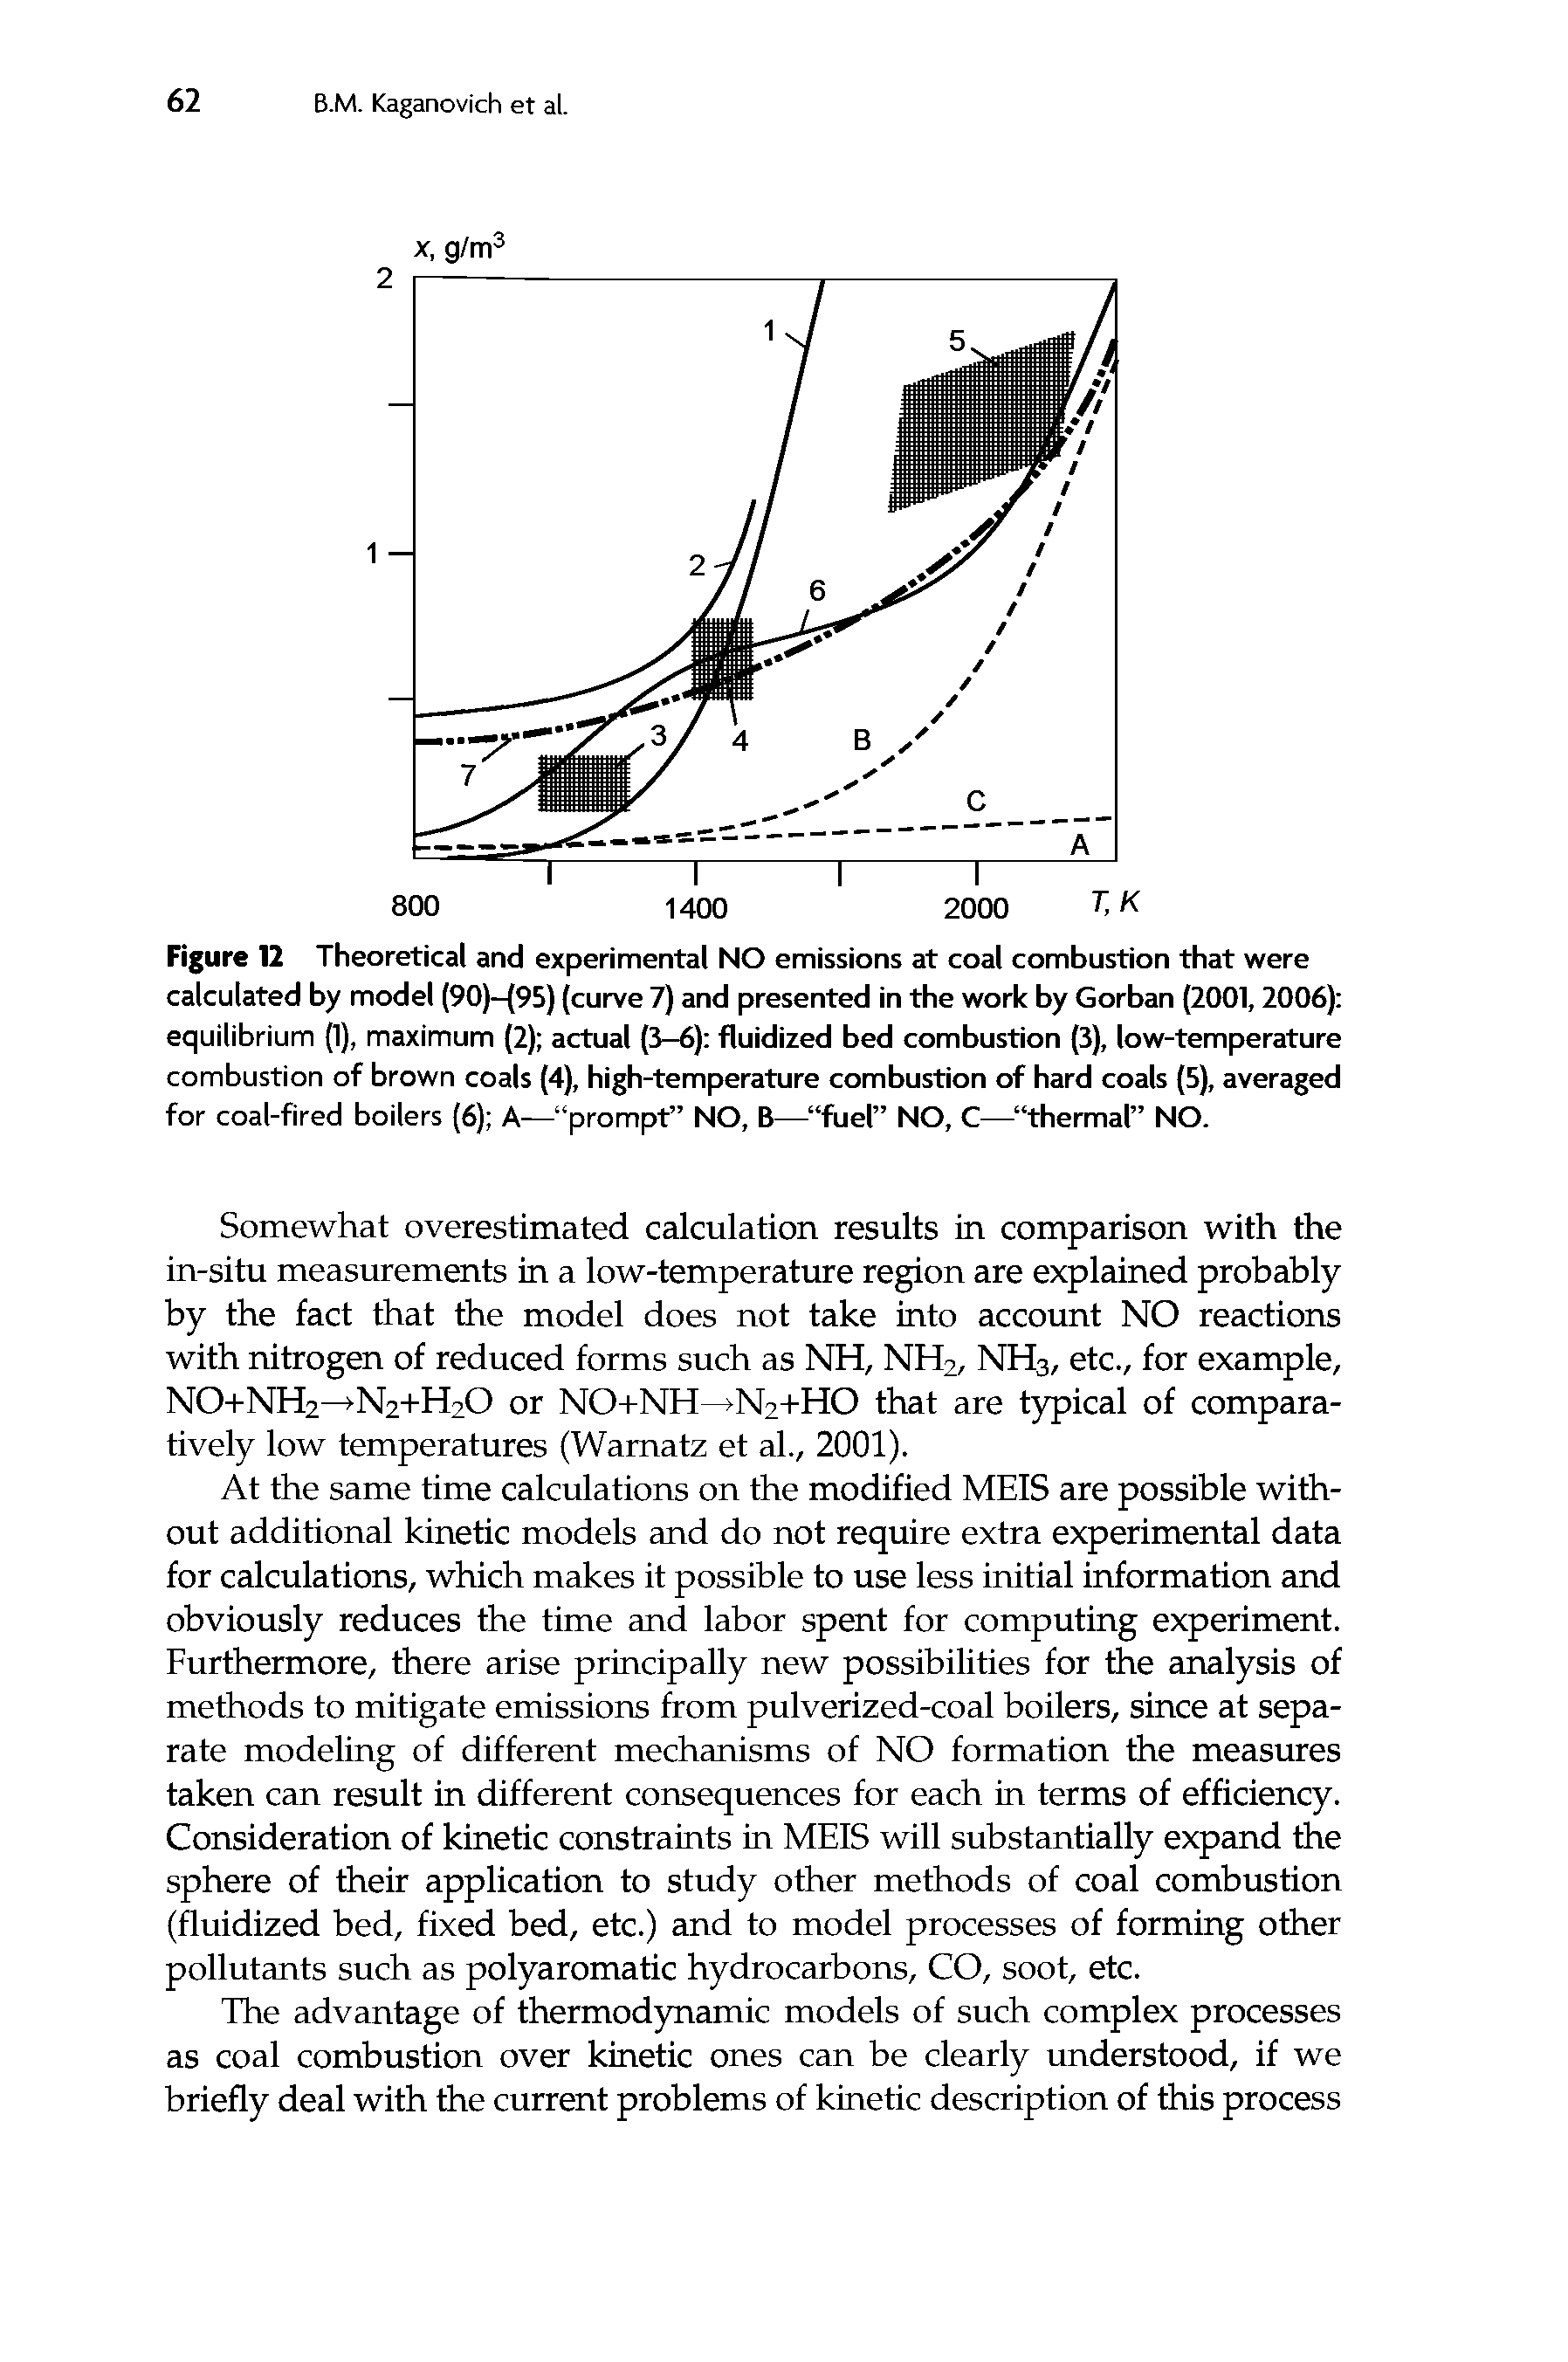 Figure 12 Theoretical and experimental NO emissions at coal combustion that were calculated by model (90)—(95) (curve 7) and presented in the work by Gorban (2001,2006) equilibrium (1), maximum (2) actual (3-6) fluidized bed combustion (3), low-temperature combustion of brown coals (4), high-temperature combustion of hard coals (5), averaged for coal-fired boilers (6) A— prompt NO, B— fuel NO, C— thermal NO.